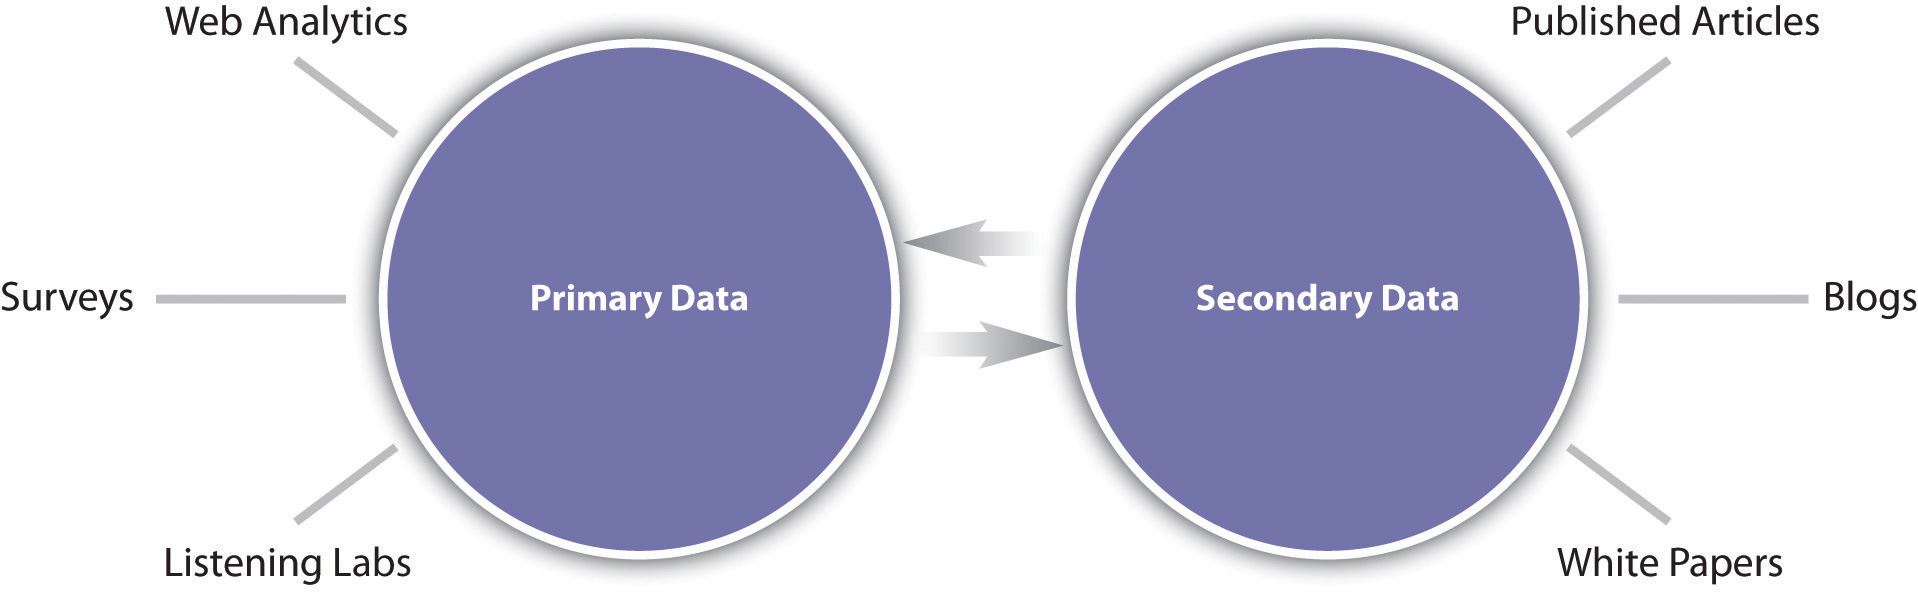 difference between primary and secondary data